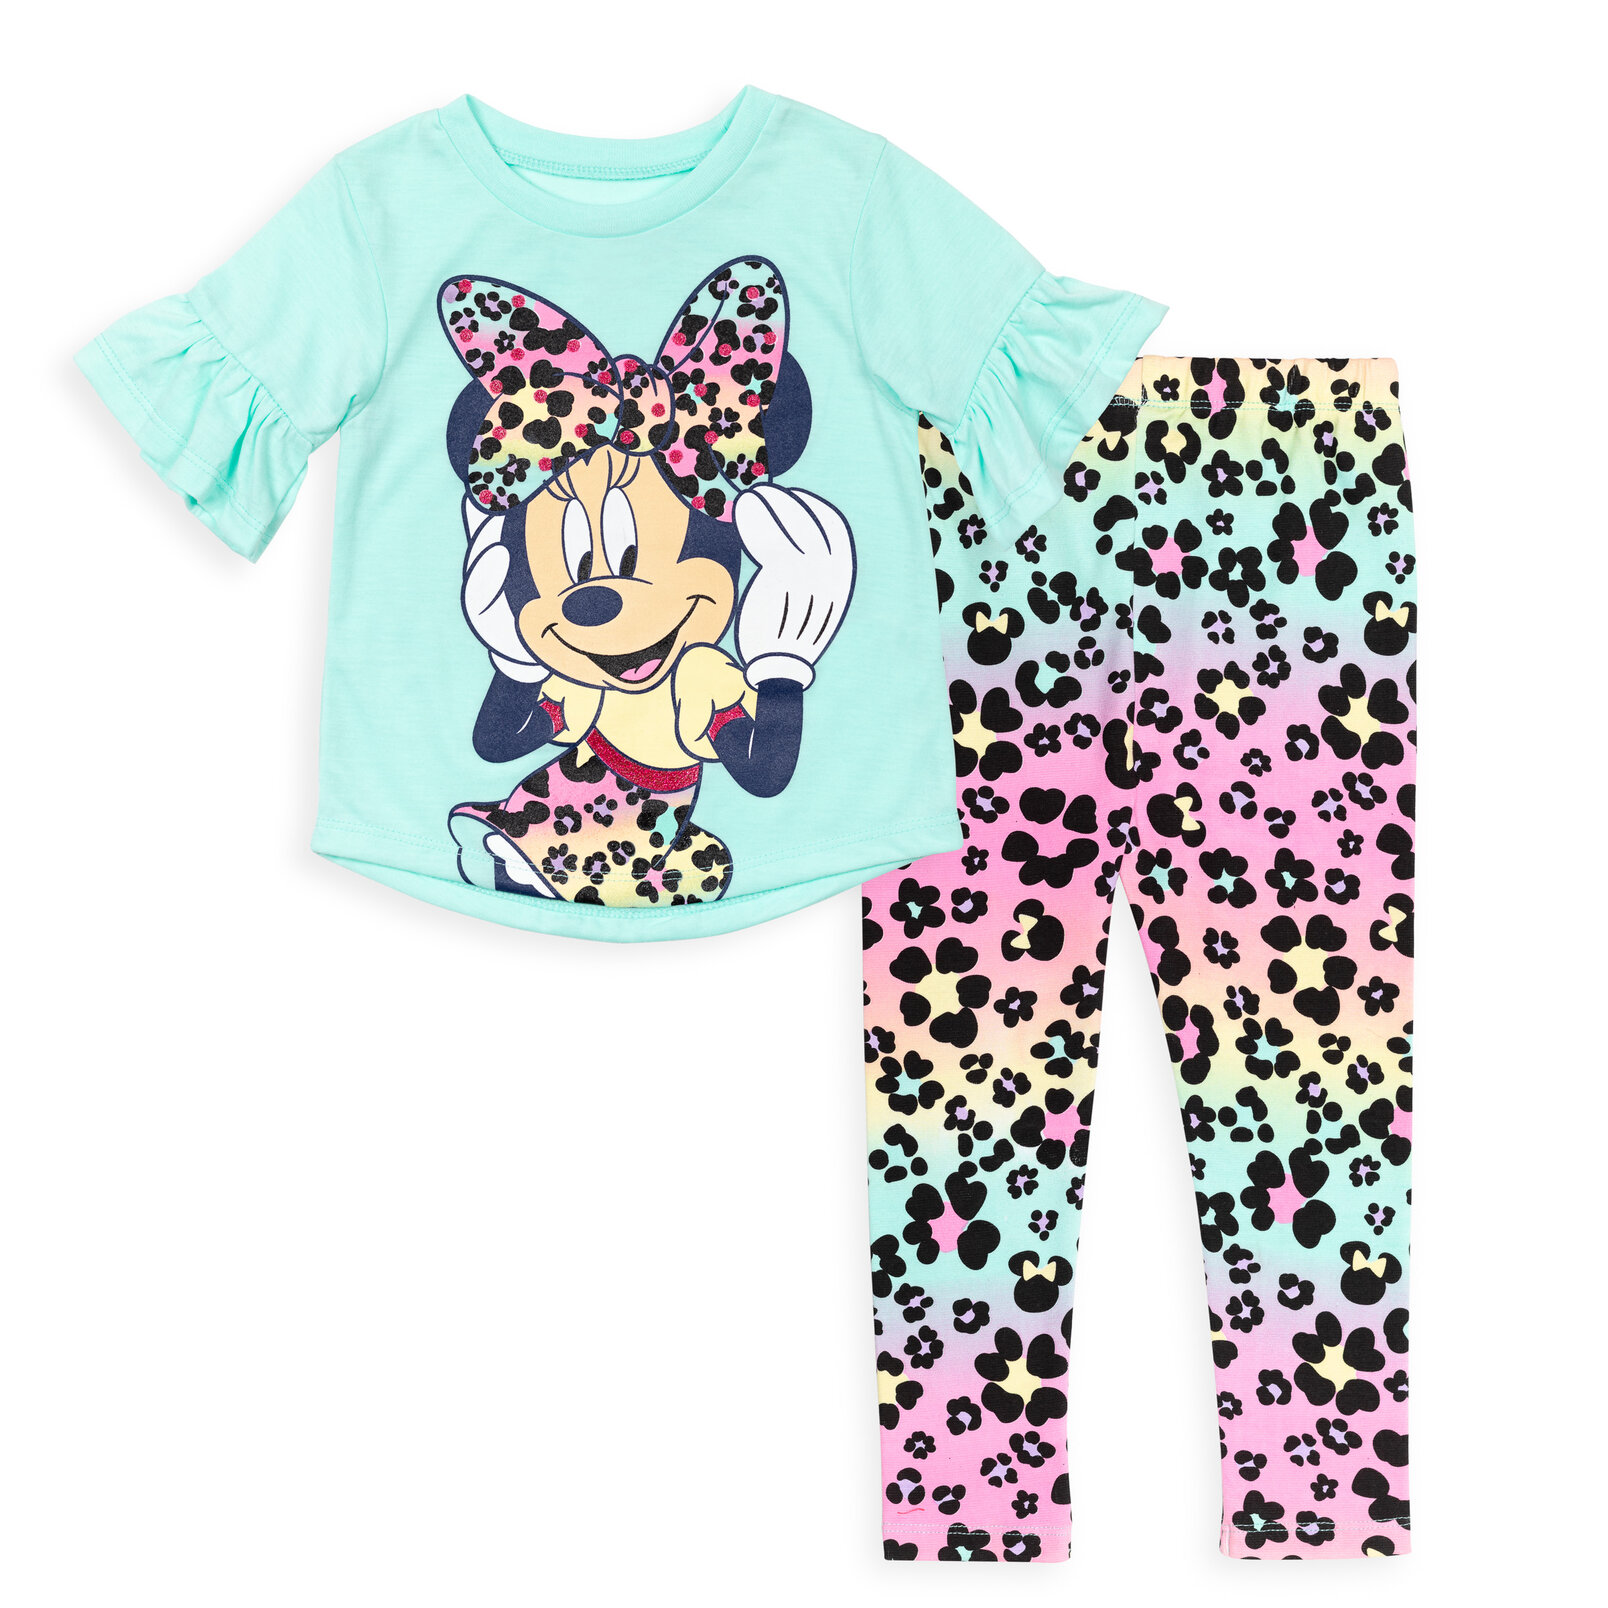 Disney Minnie Mouse Little Girls T-Shirt and Leggings Outfit Set Infant to Big Kid - image 1 of 5